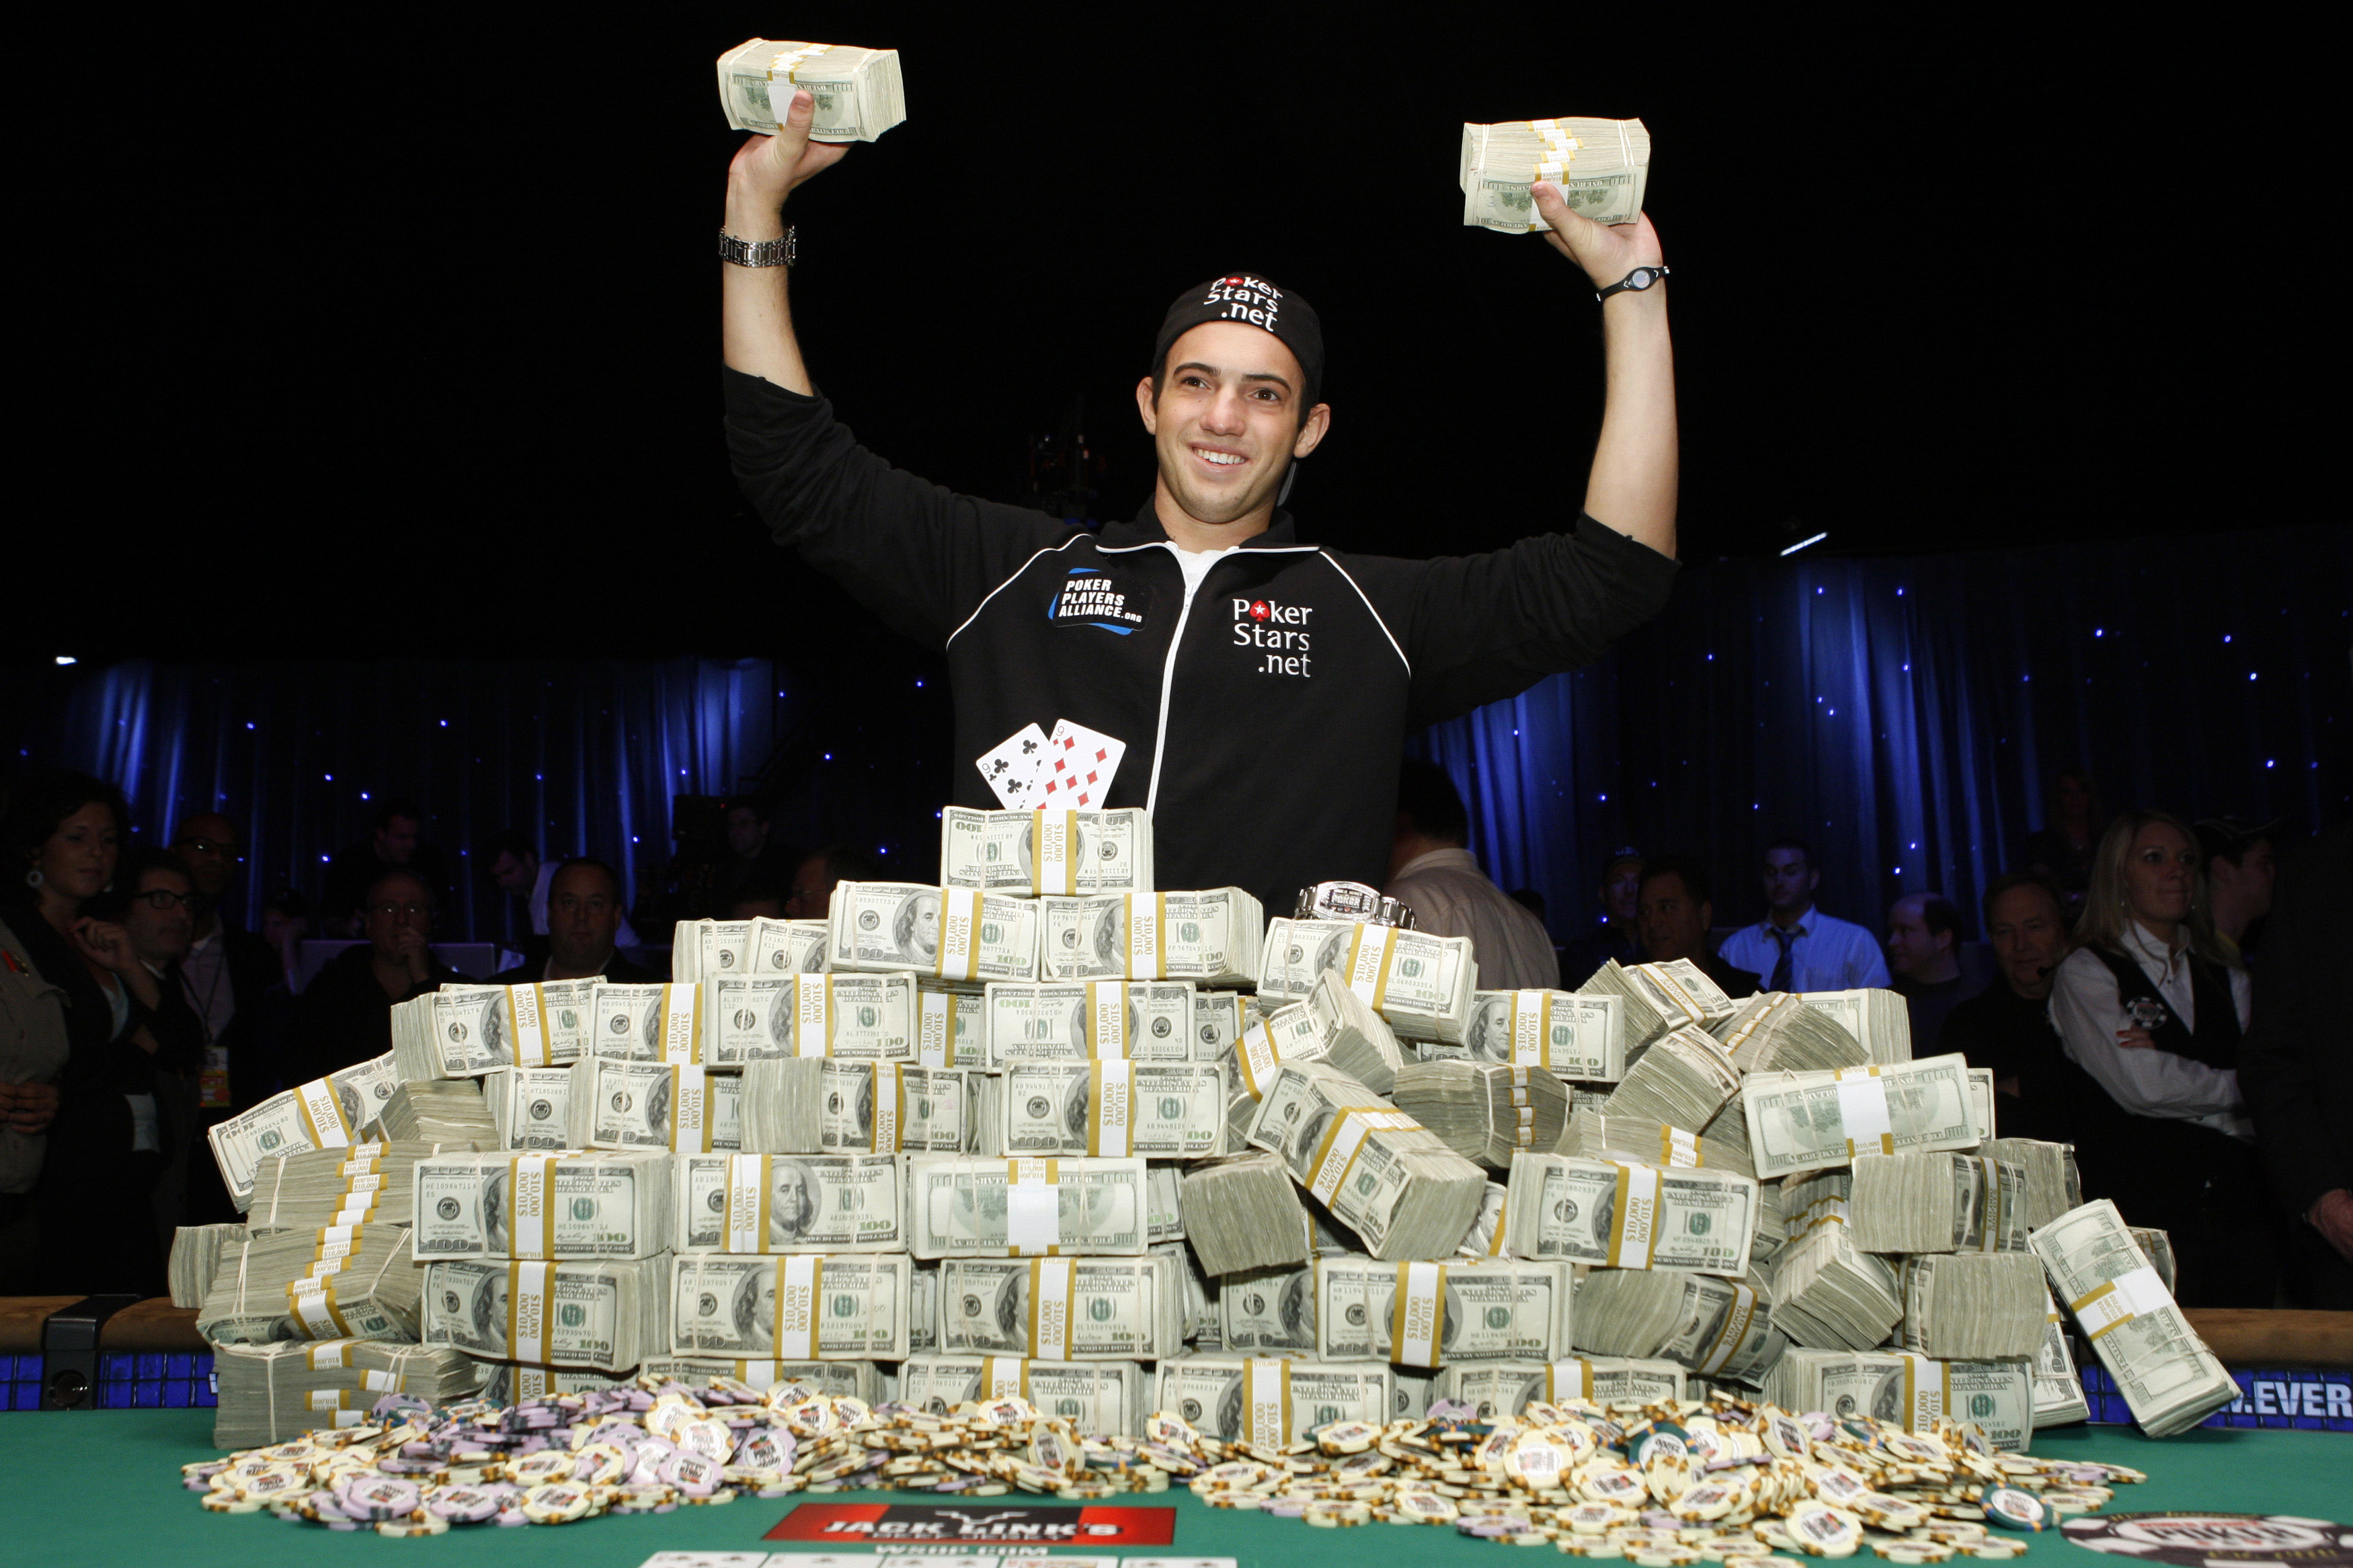 Joe Cada, a 21-year old poker professional from Michigan, poses with bundles of cash after winning $8.5 million in prize money at the World Series of Poker tournament in Las Vegas